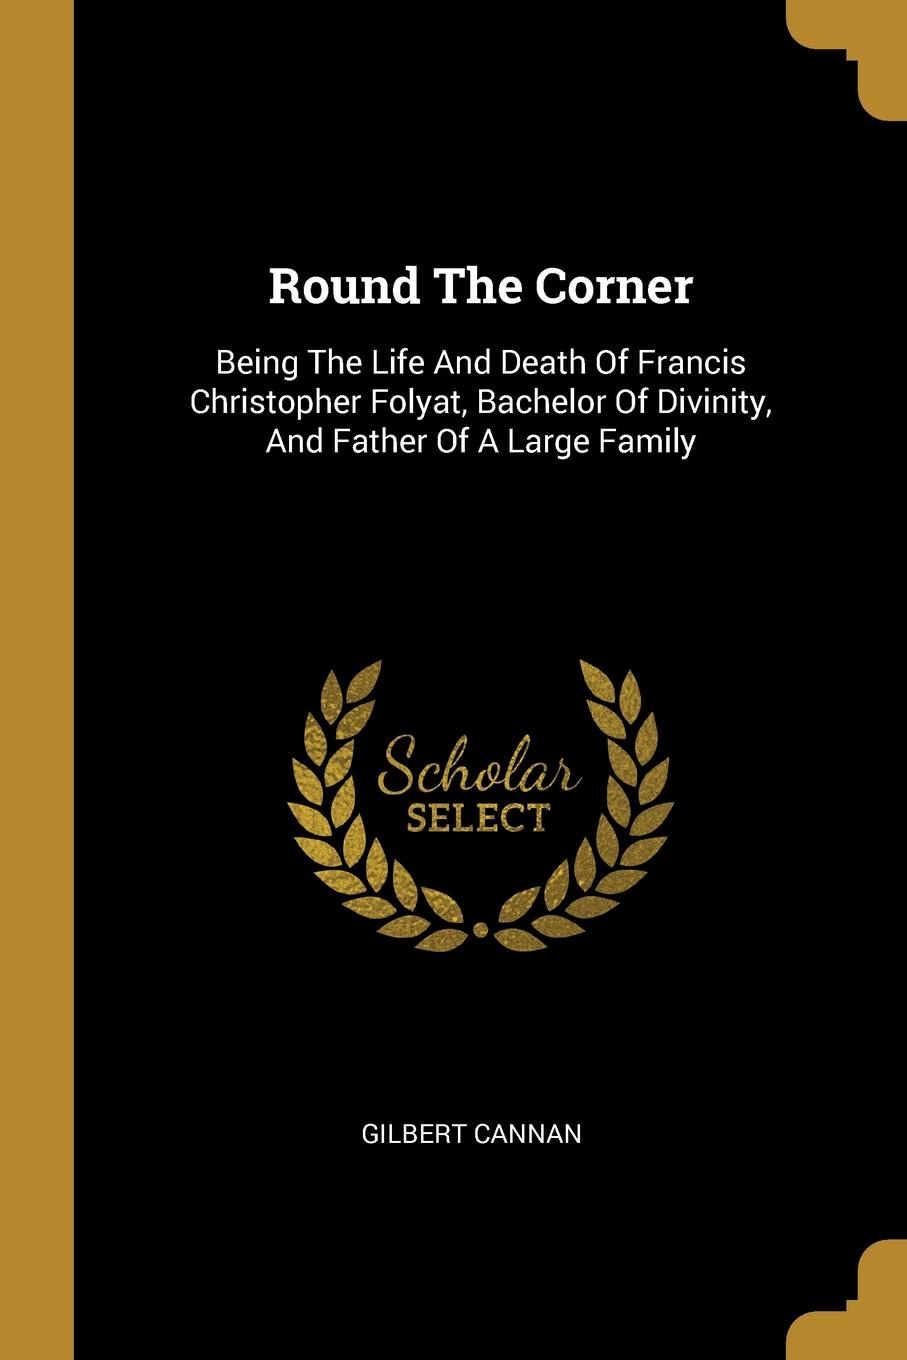 Round The Corner. Being The Life And Death Of Francis Christopher Folyat, Bachelor Of Divinity, And Father Of A Large Family